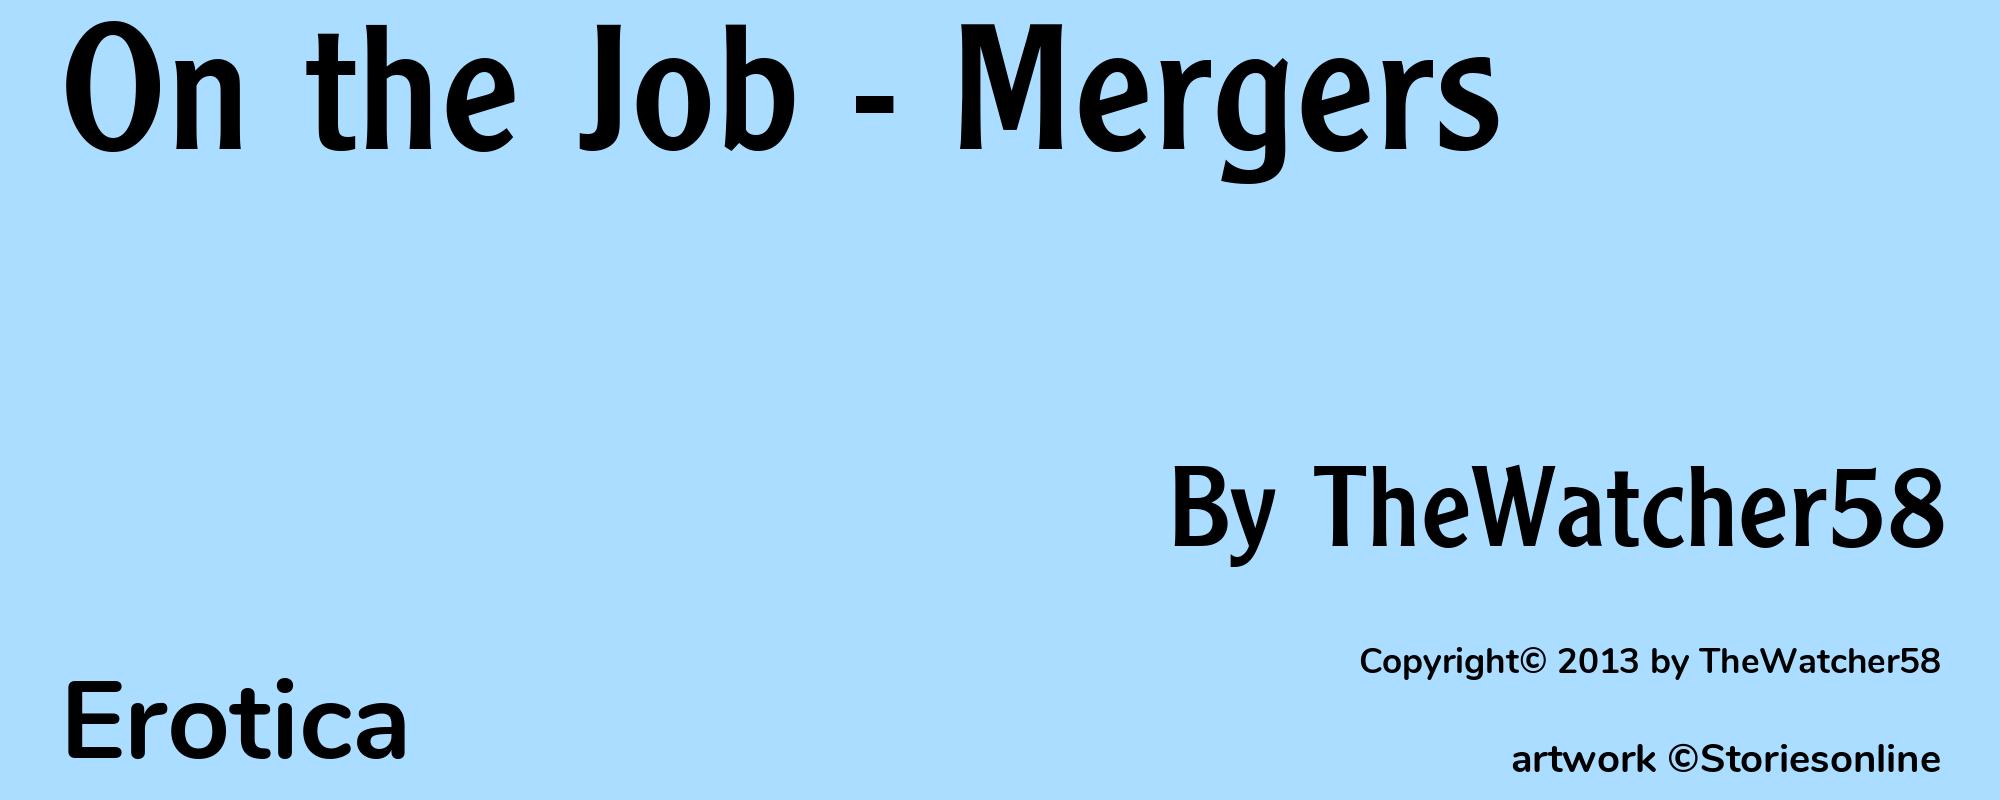 On the Job - Mergers - Cover